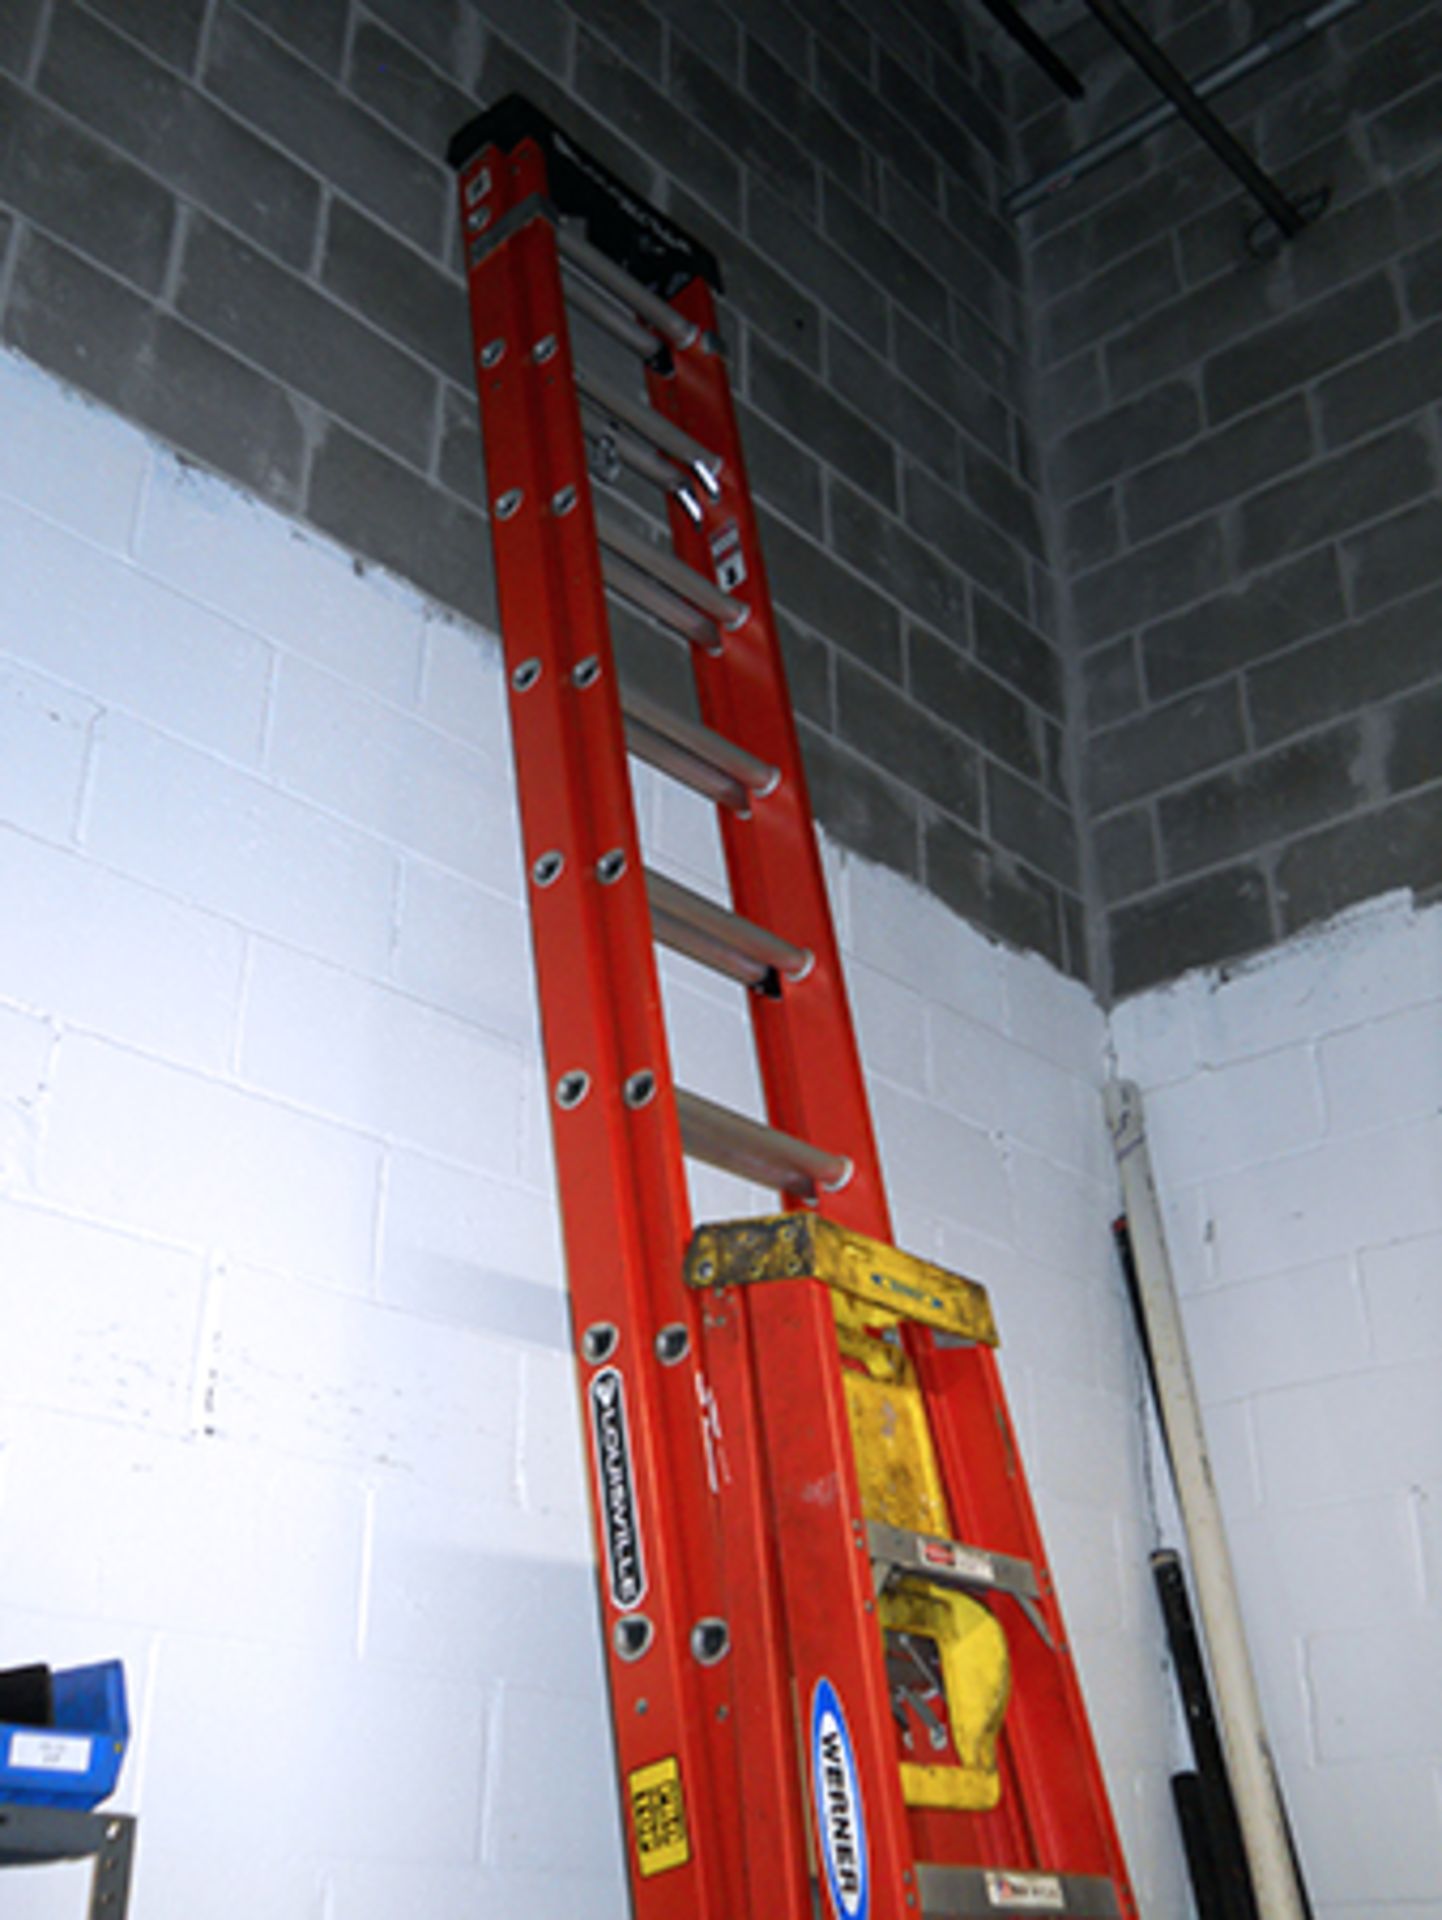 Shop Ladders - Image 2 of 6